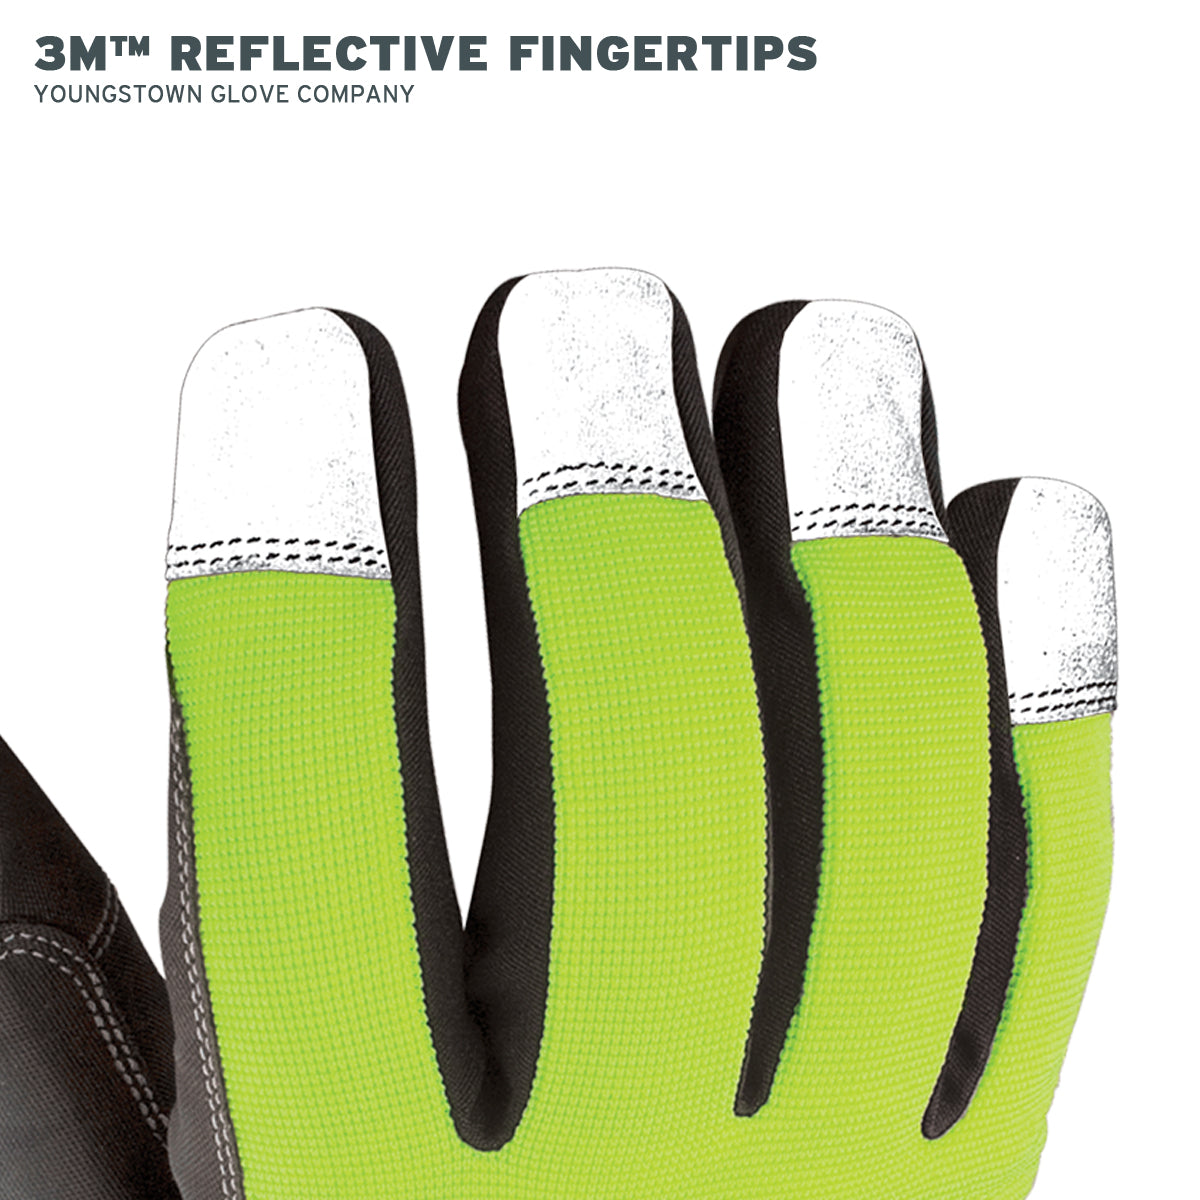 FIRM GRIP Large Winter Safety Pro Gloves with Thinsulate Liner